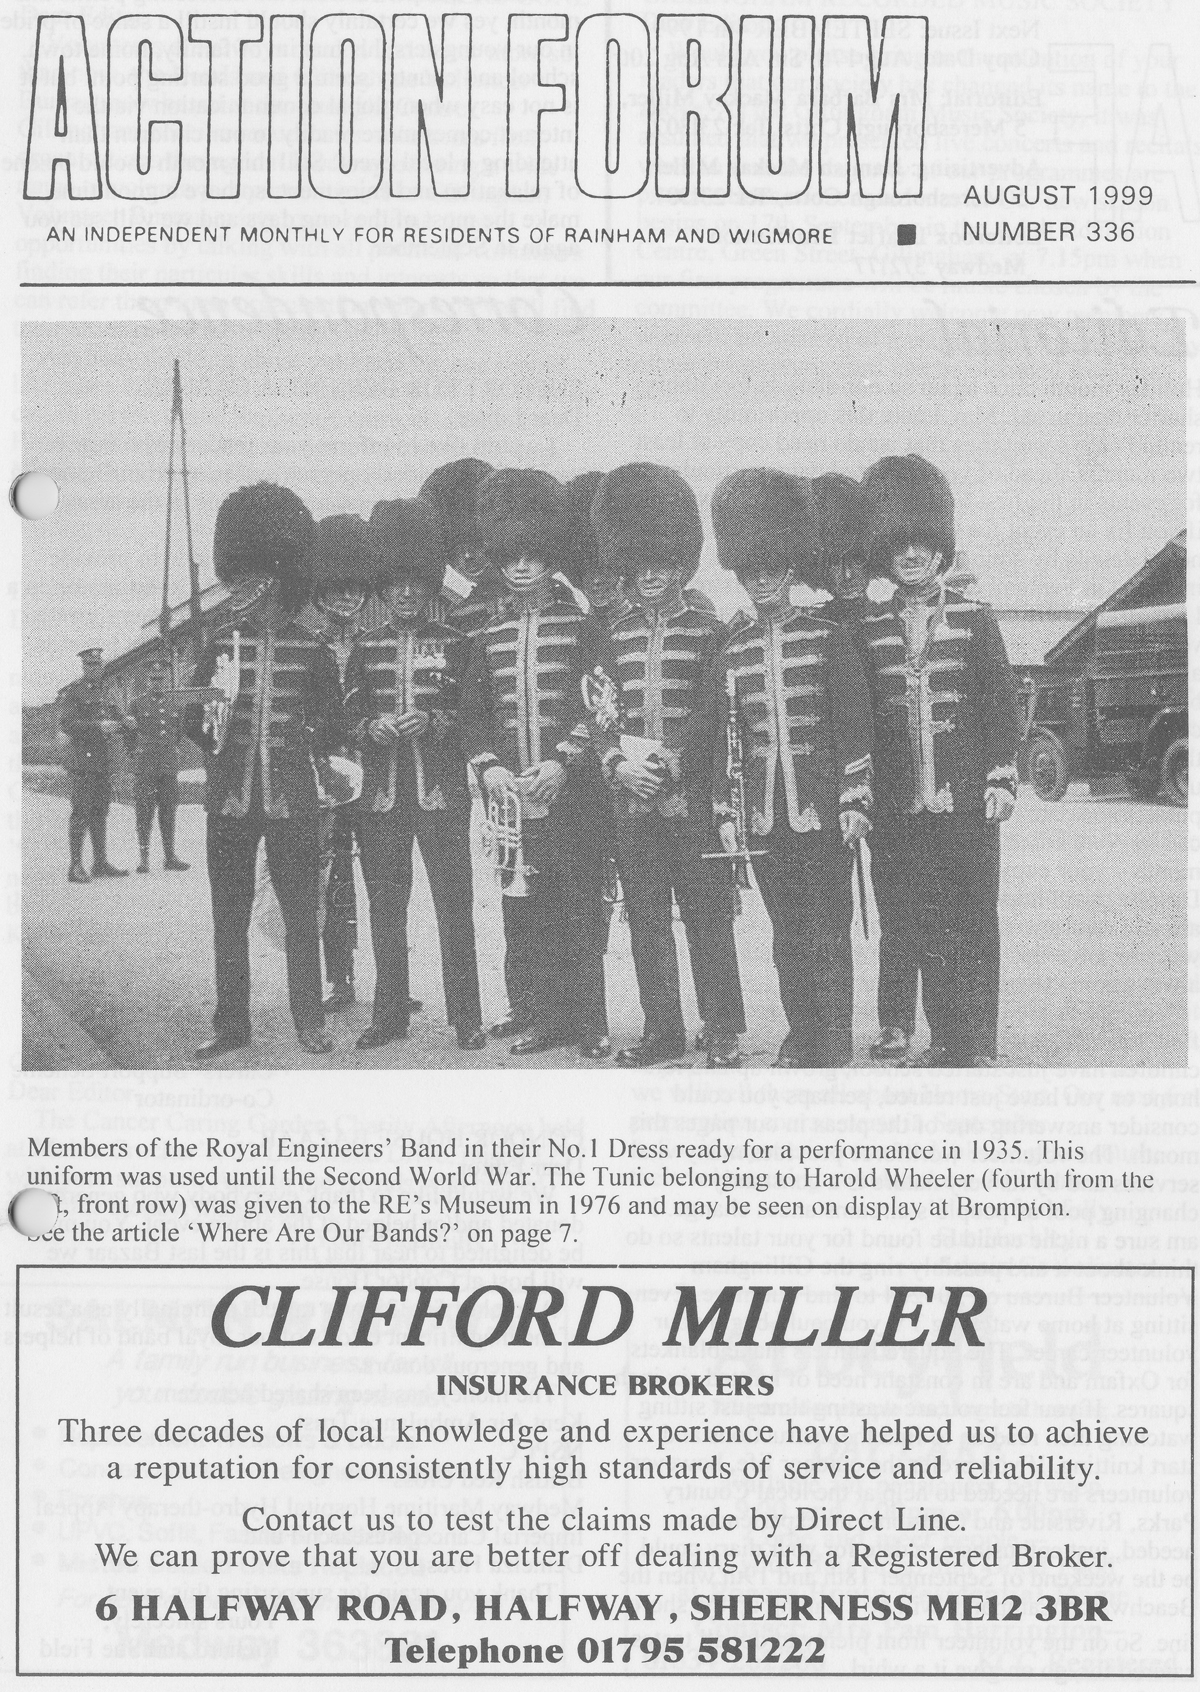 Cover photo is of the Royal Engineers band in their No1 Dress uniform in 1935.